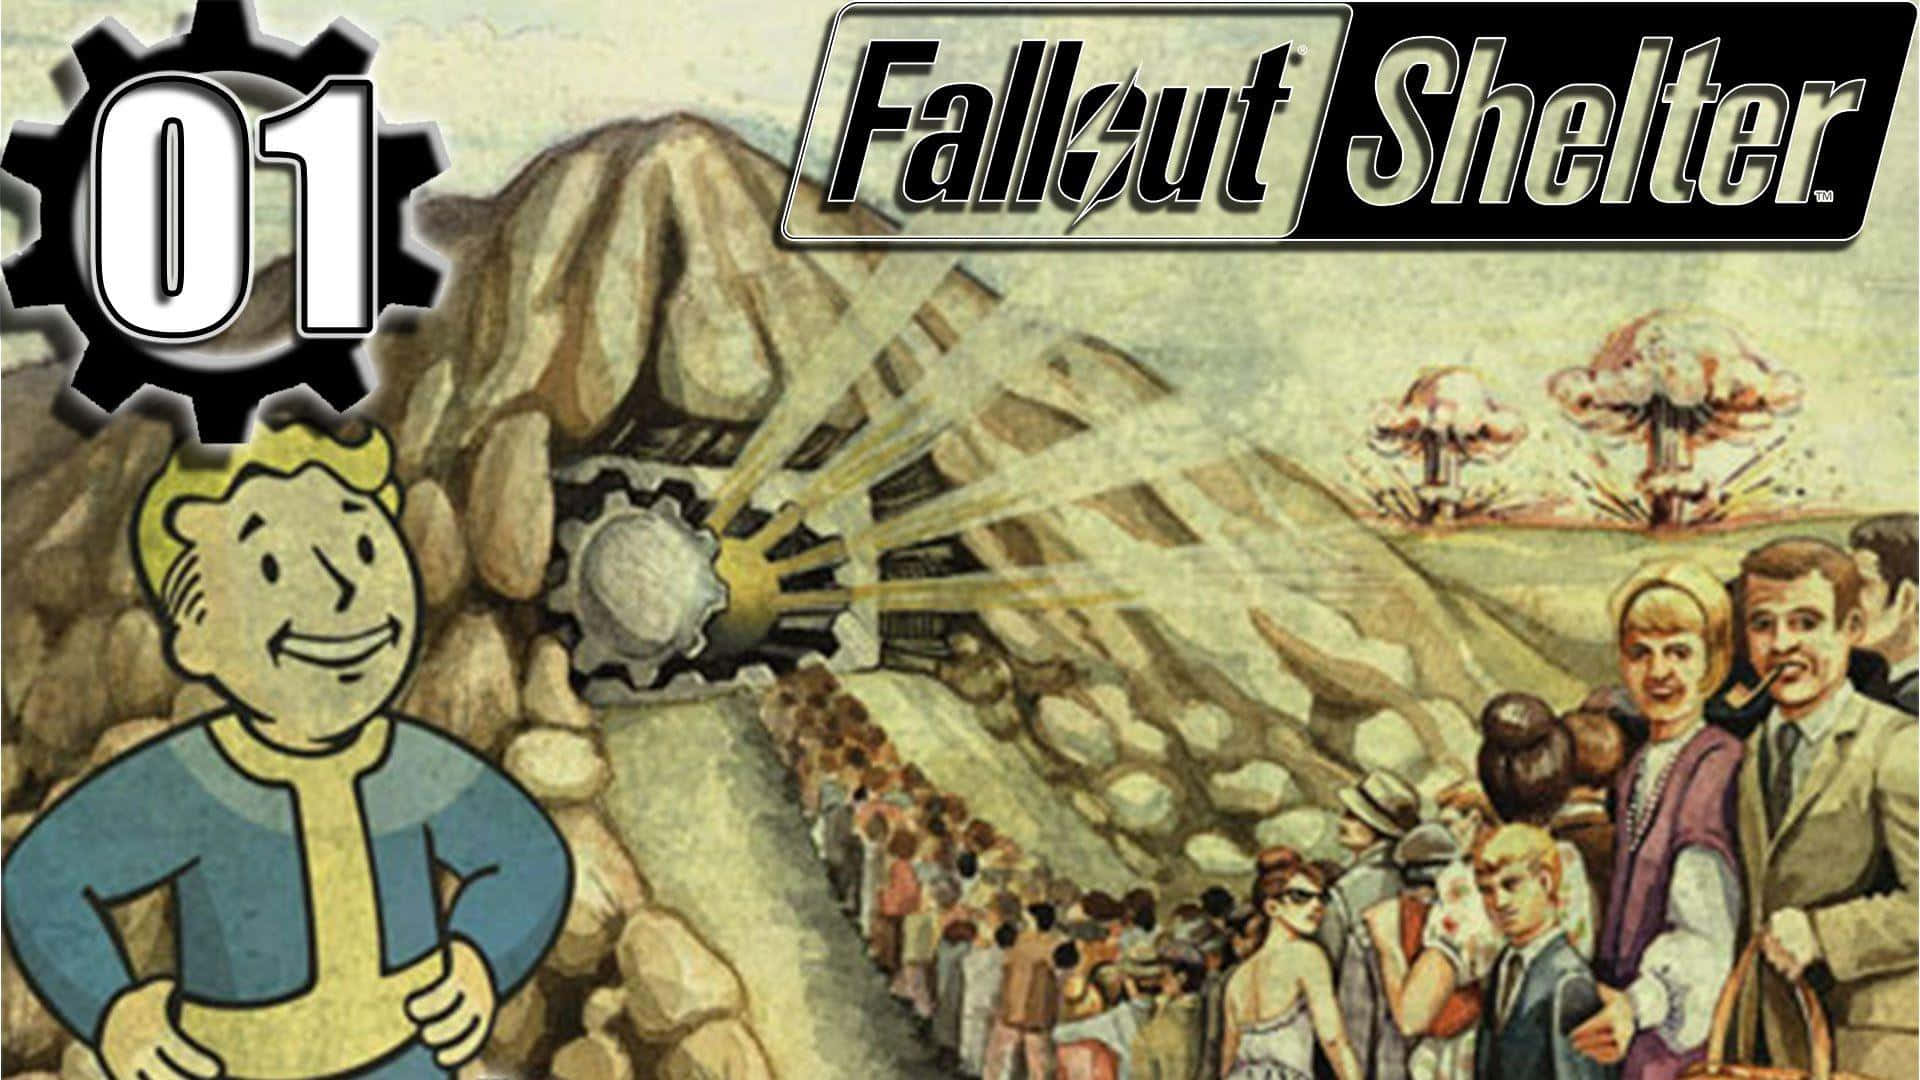 Vault Dwellers busy inside the Fallout Shelter Wallpaper